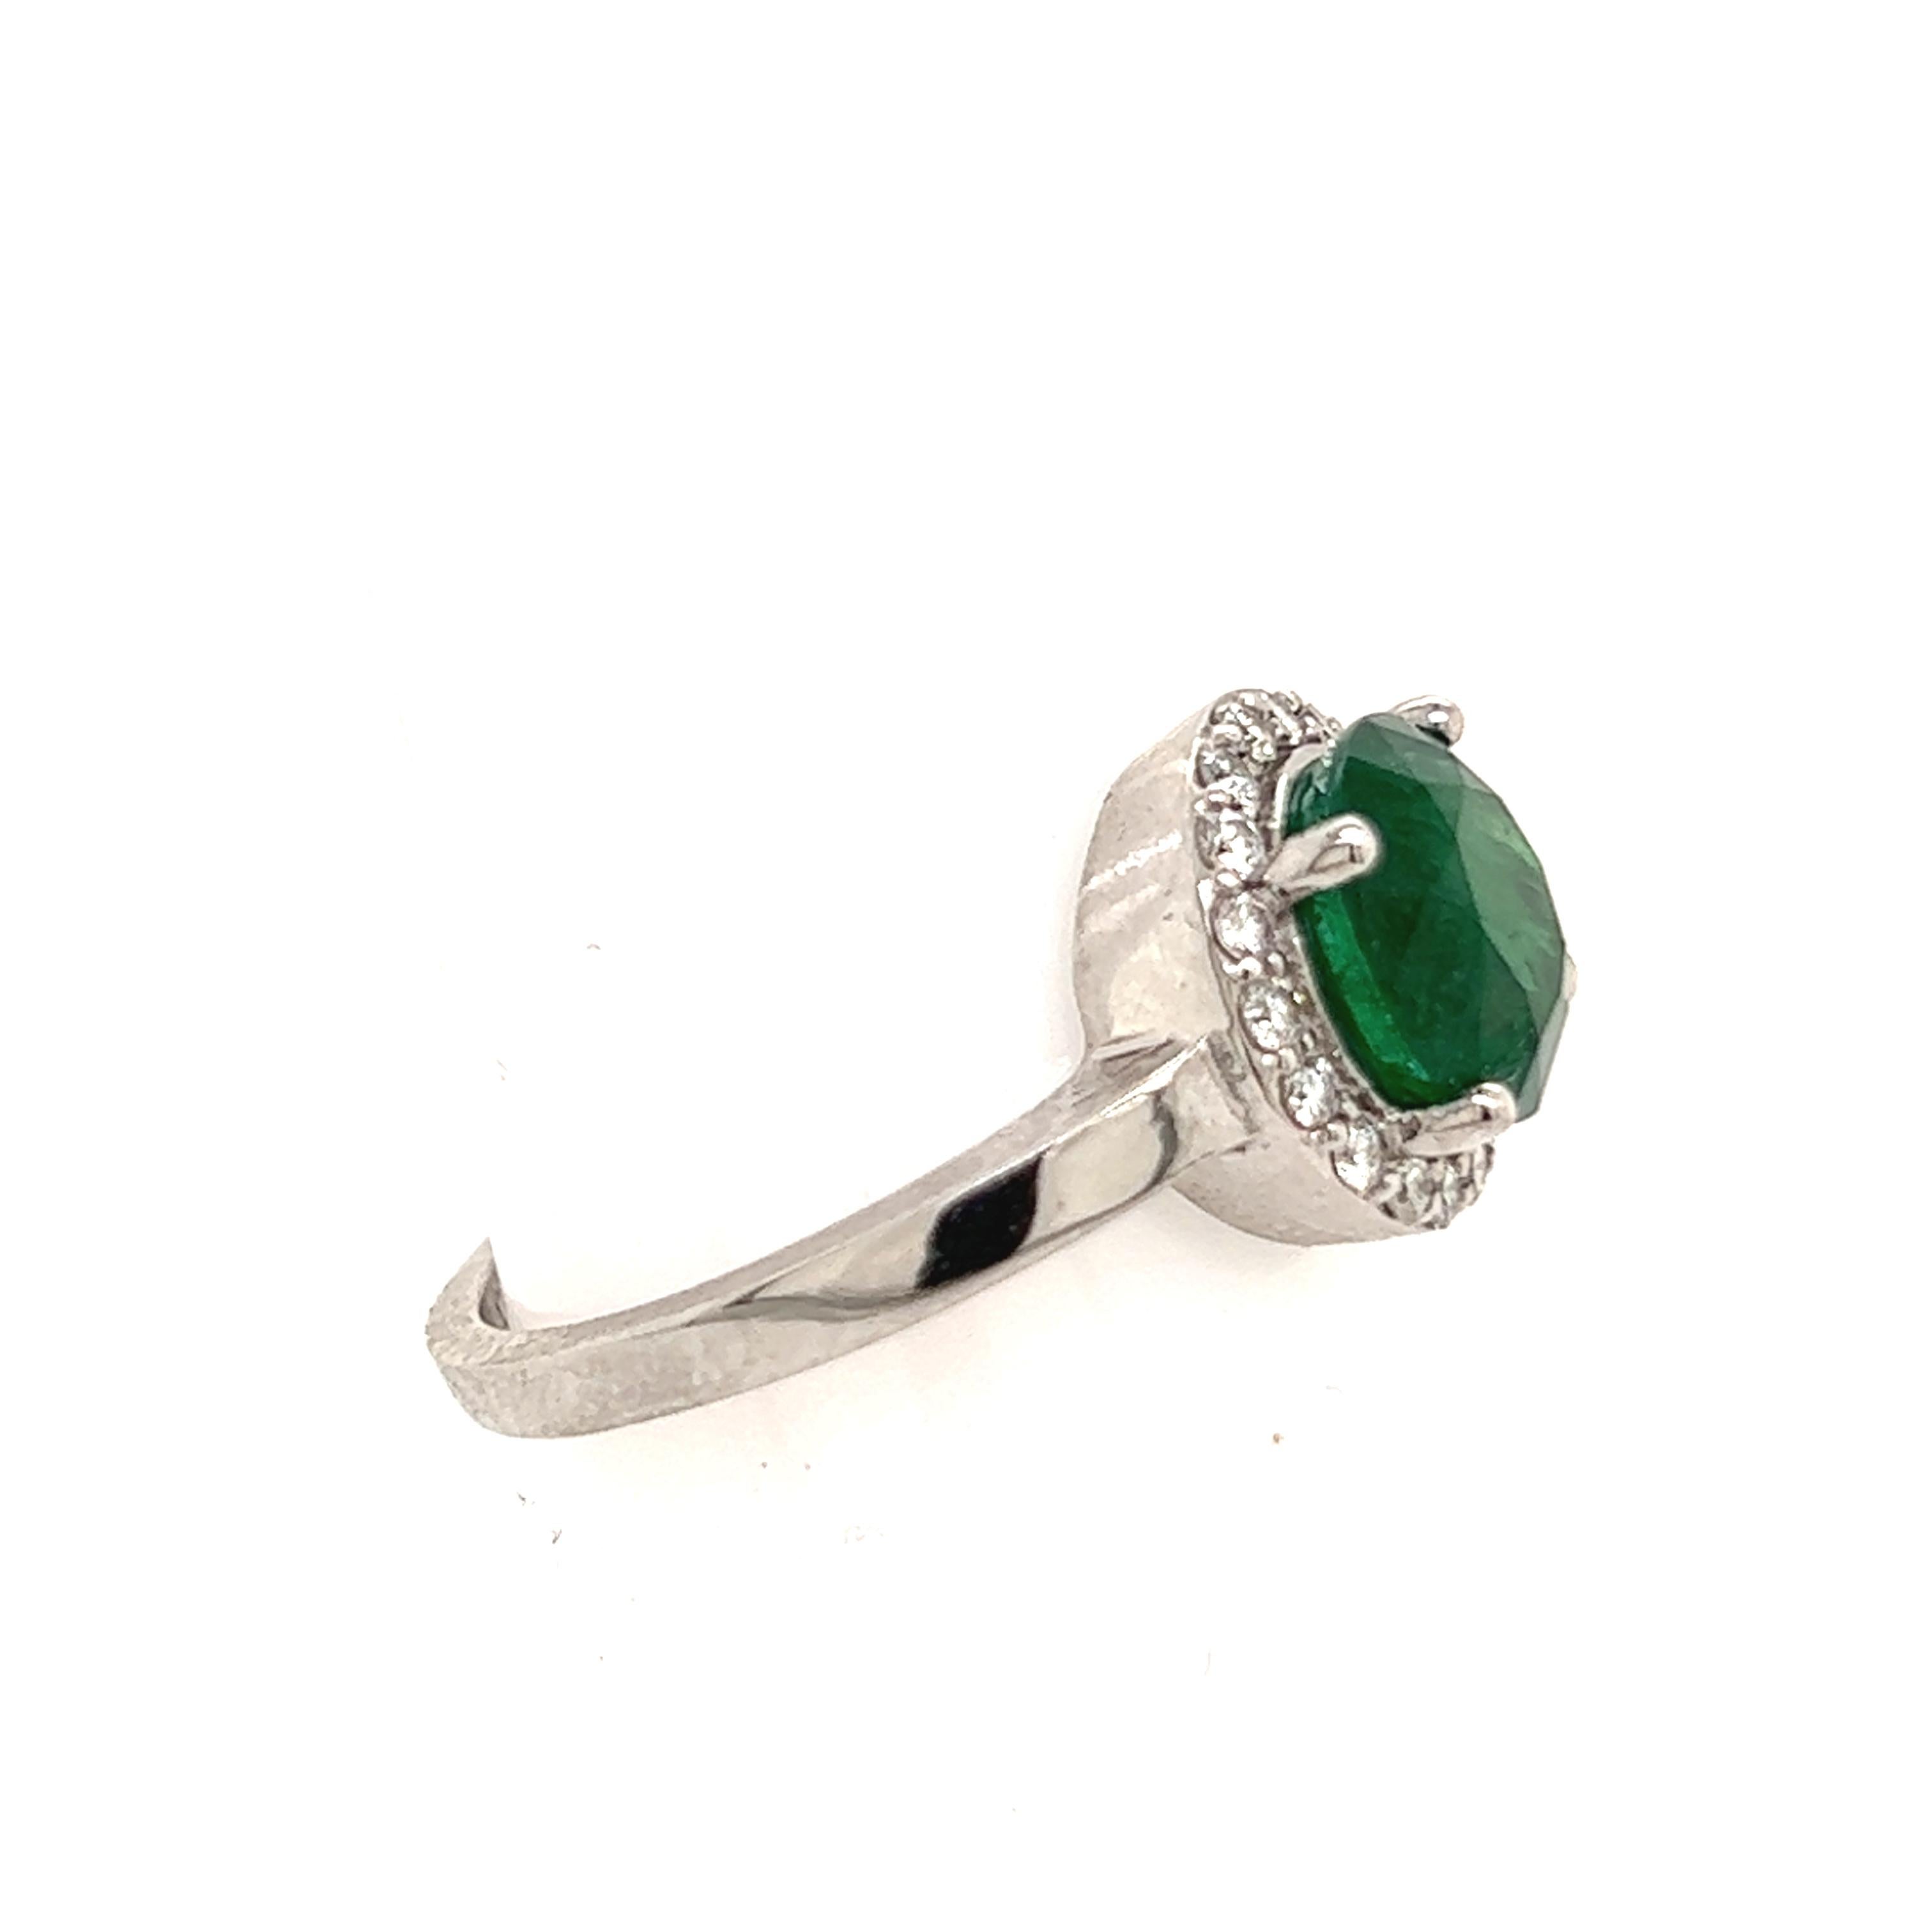 Natural Emerald Diamond Ring 14k Gold 2.83 TCW Certified For Sale 6